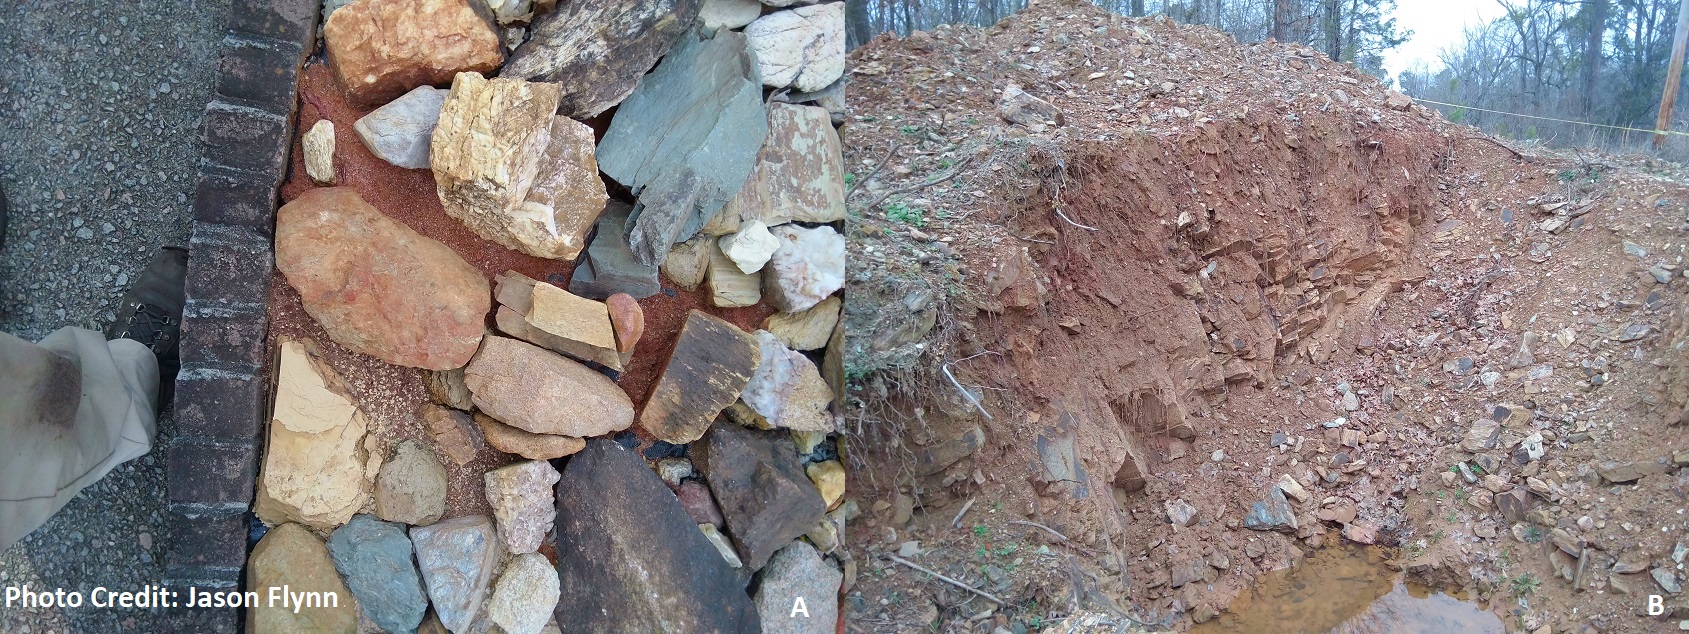 A) Looking at a contrast between Kiokee and Belair subsoil types on display. B) A fleeting glimpse of Belair belt subsoil and bedrock during utility work that is now filled in.